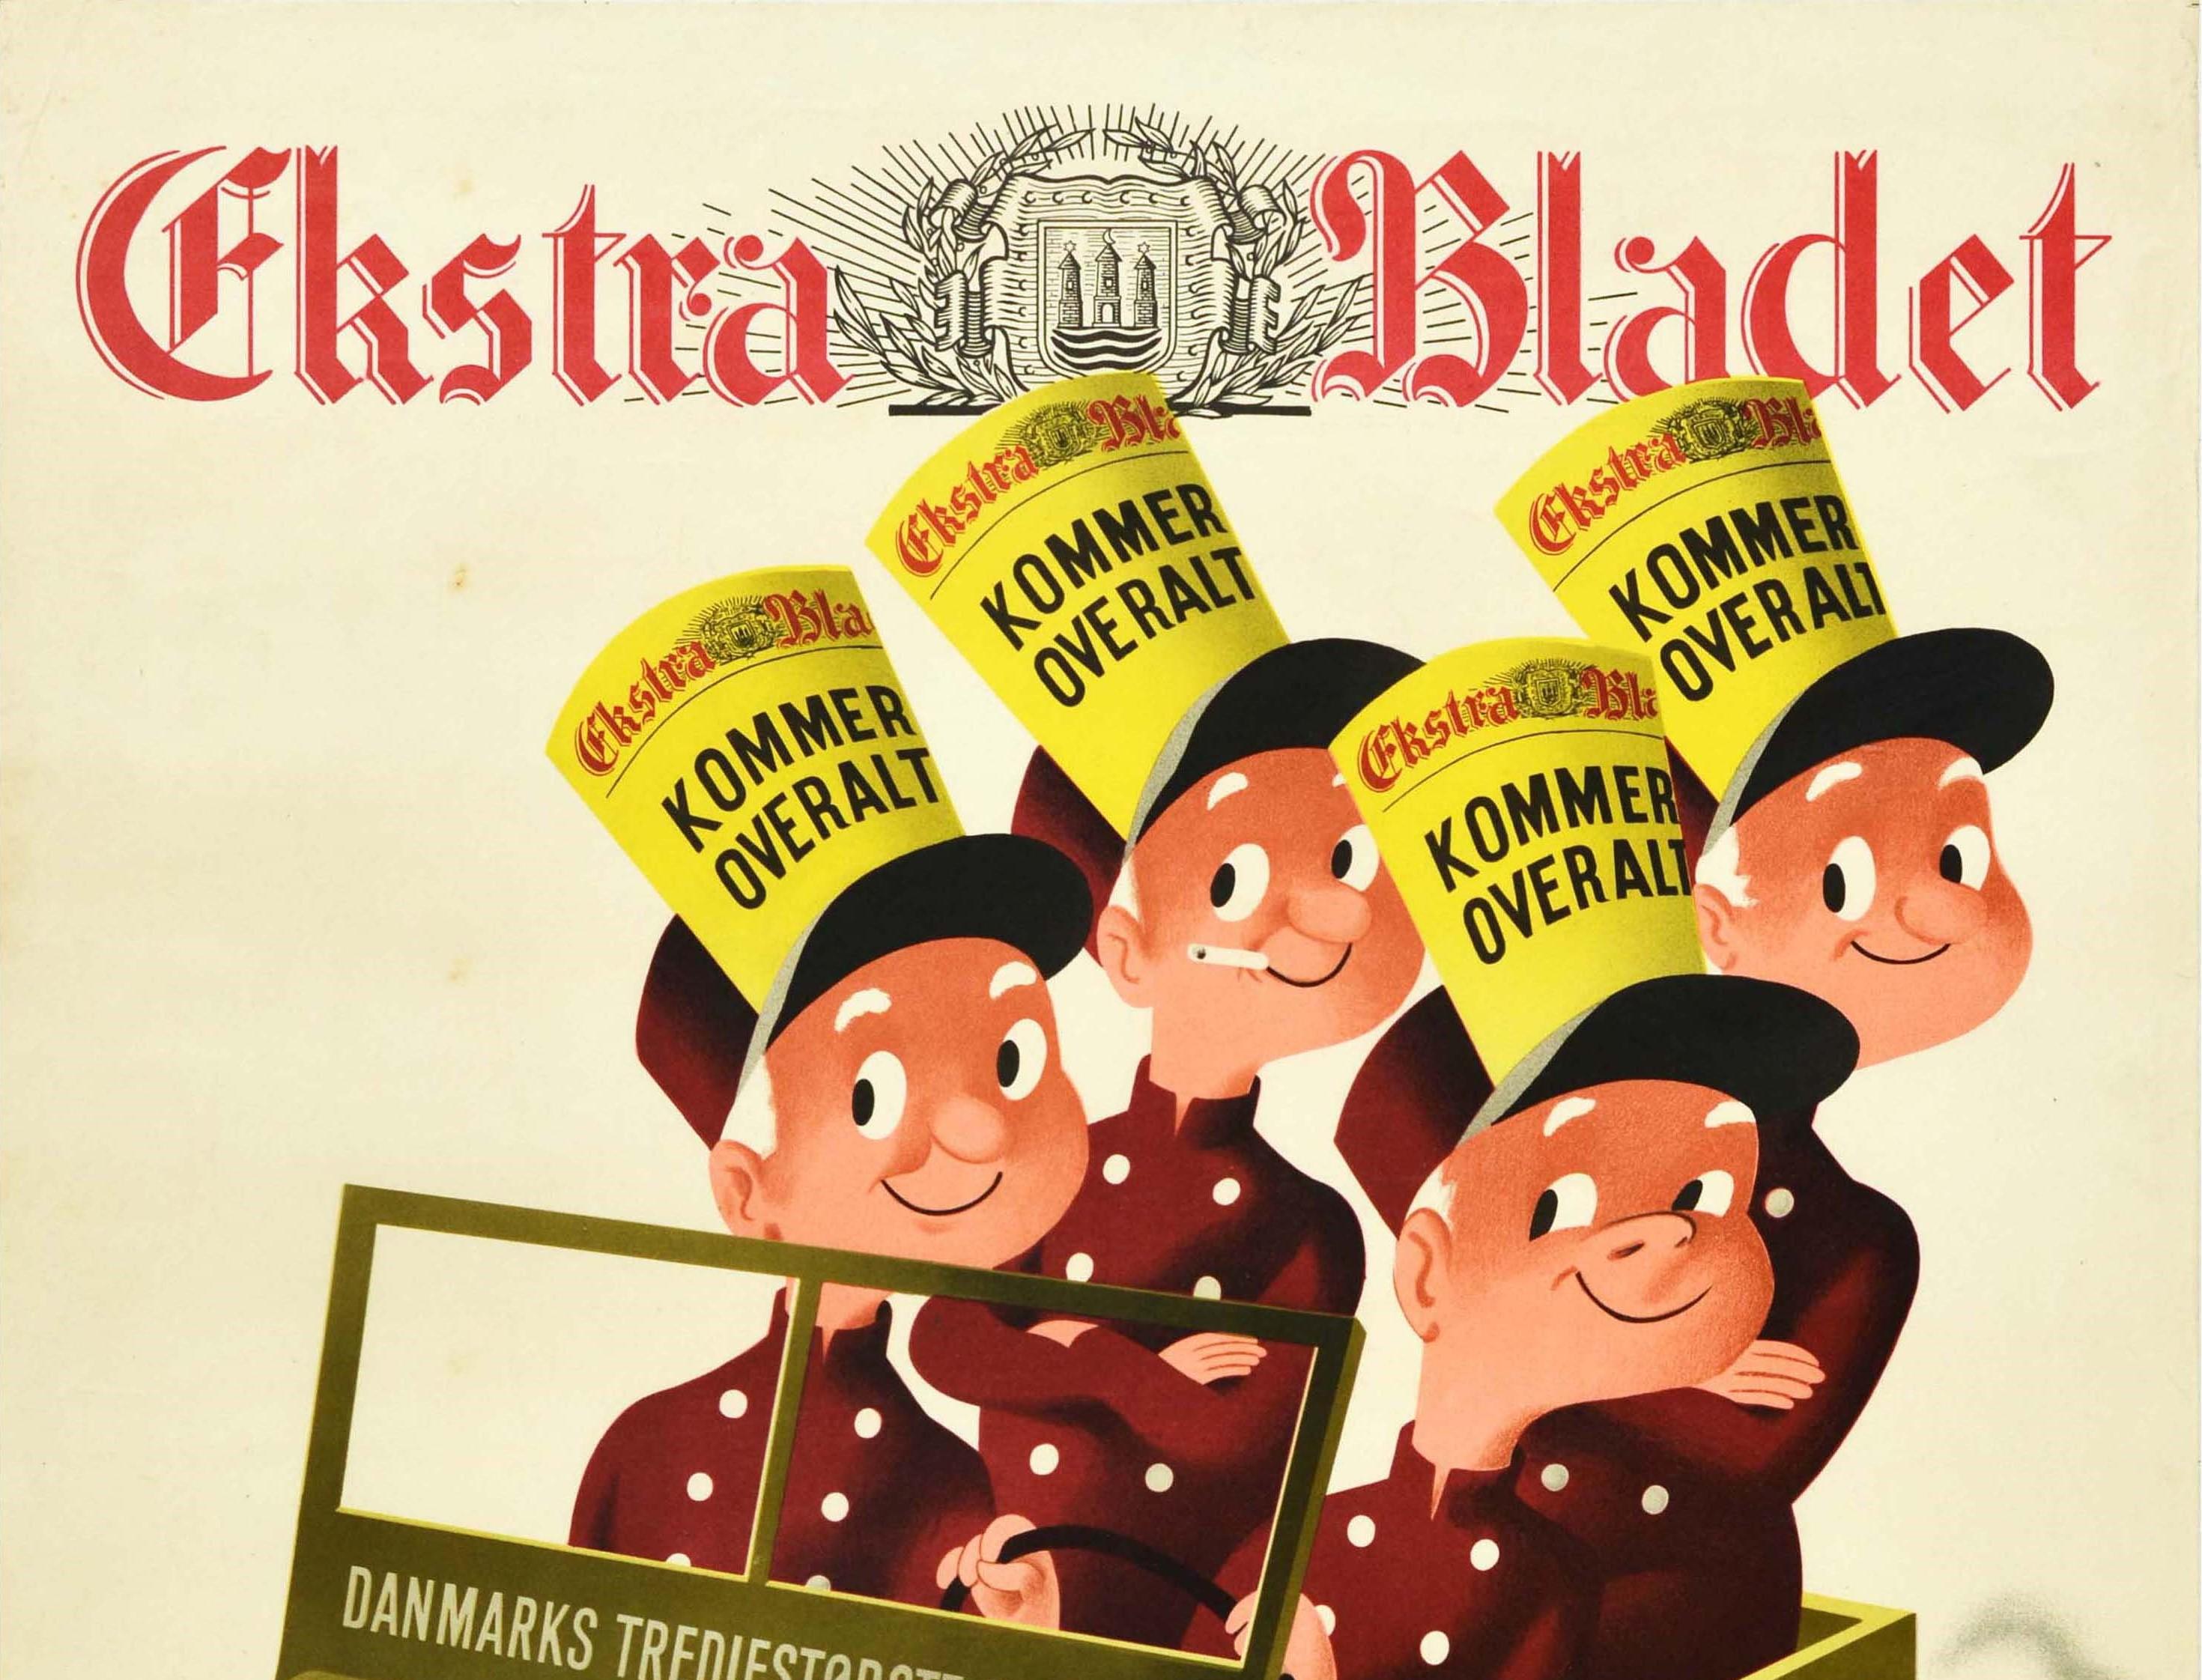 Original vintage advertising poster for the Danish Ekstra Bladet newspaper featuring a fun illustration of four smiling men in uniform jackets and hats with papers reading - Elstra Bladet Kommer Overalt / Ekstra Bladet Comes Everywhere - riding in a